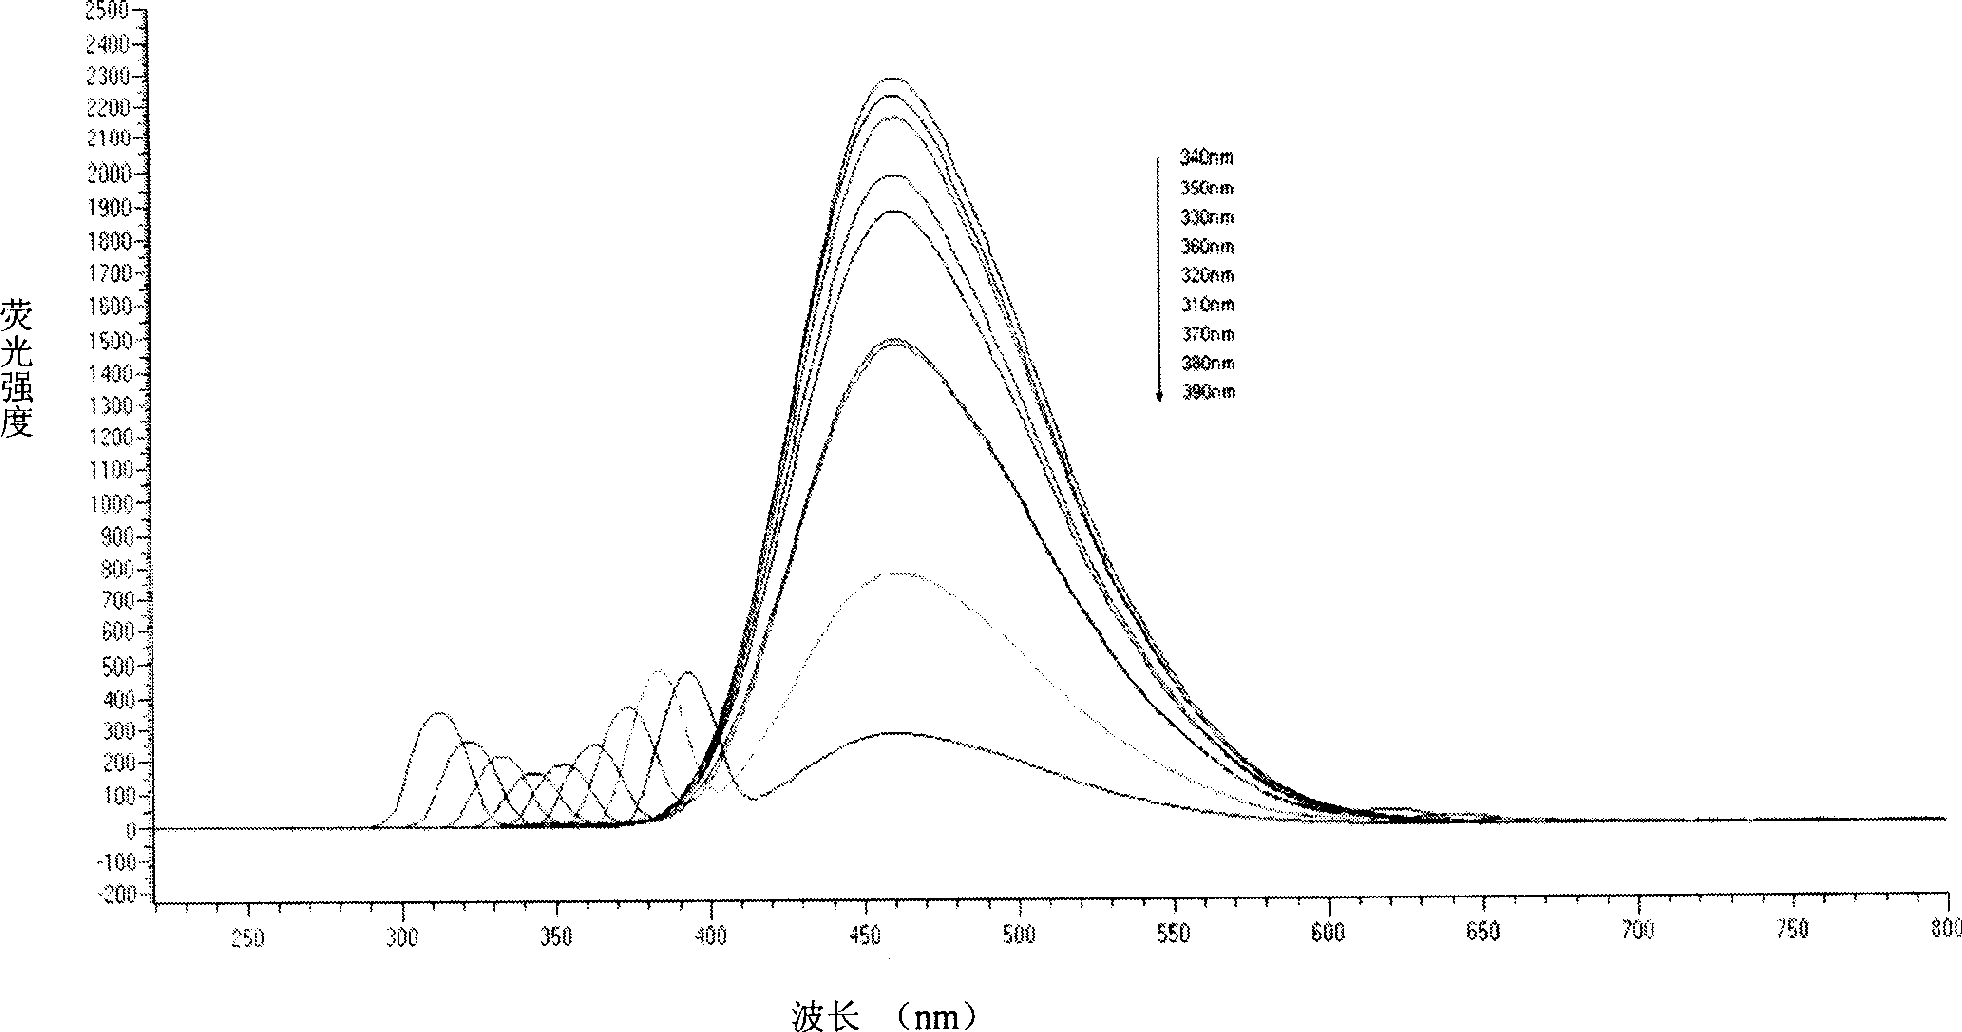 Fast alive bacteria amount measurement by fluorescence method